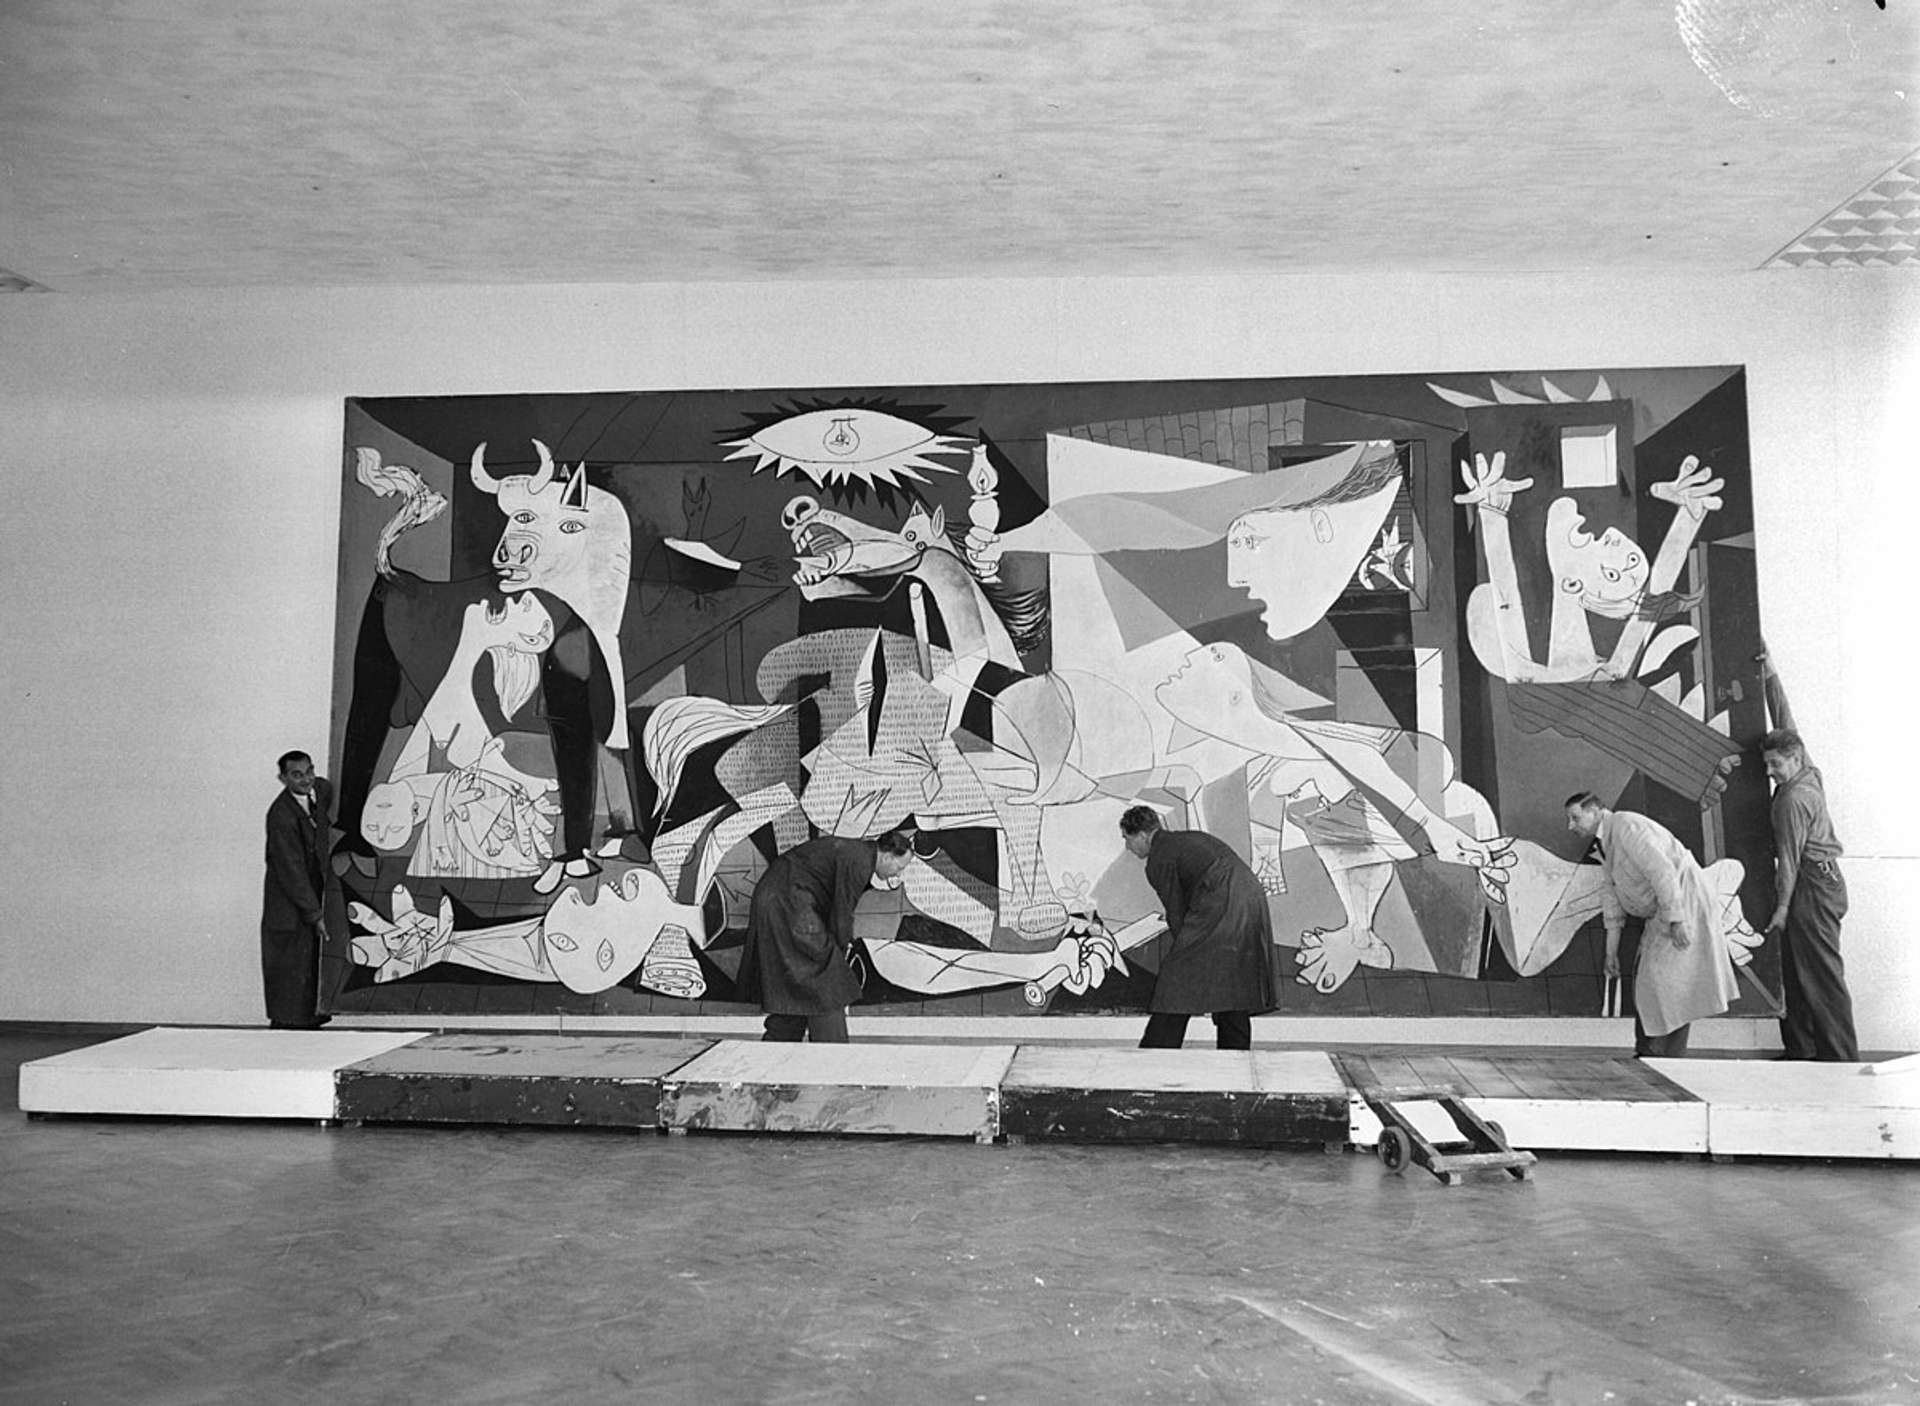 A black and white photograph of Pablo Picasso's 1937 painting, Guernica, being installed at Stedelijk Museum.